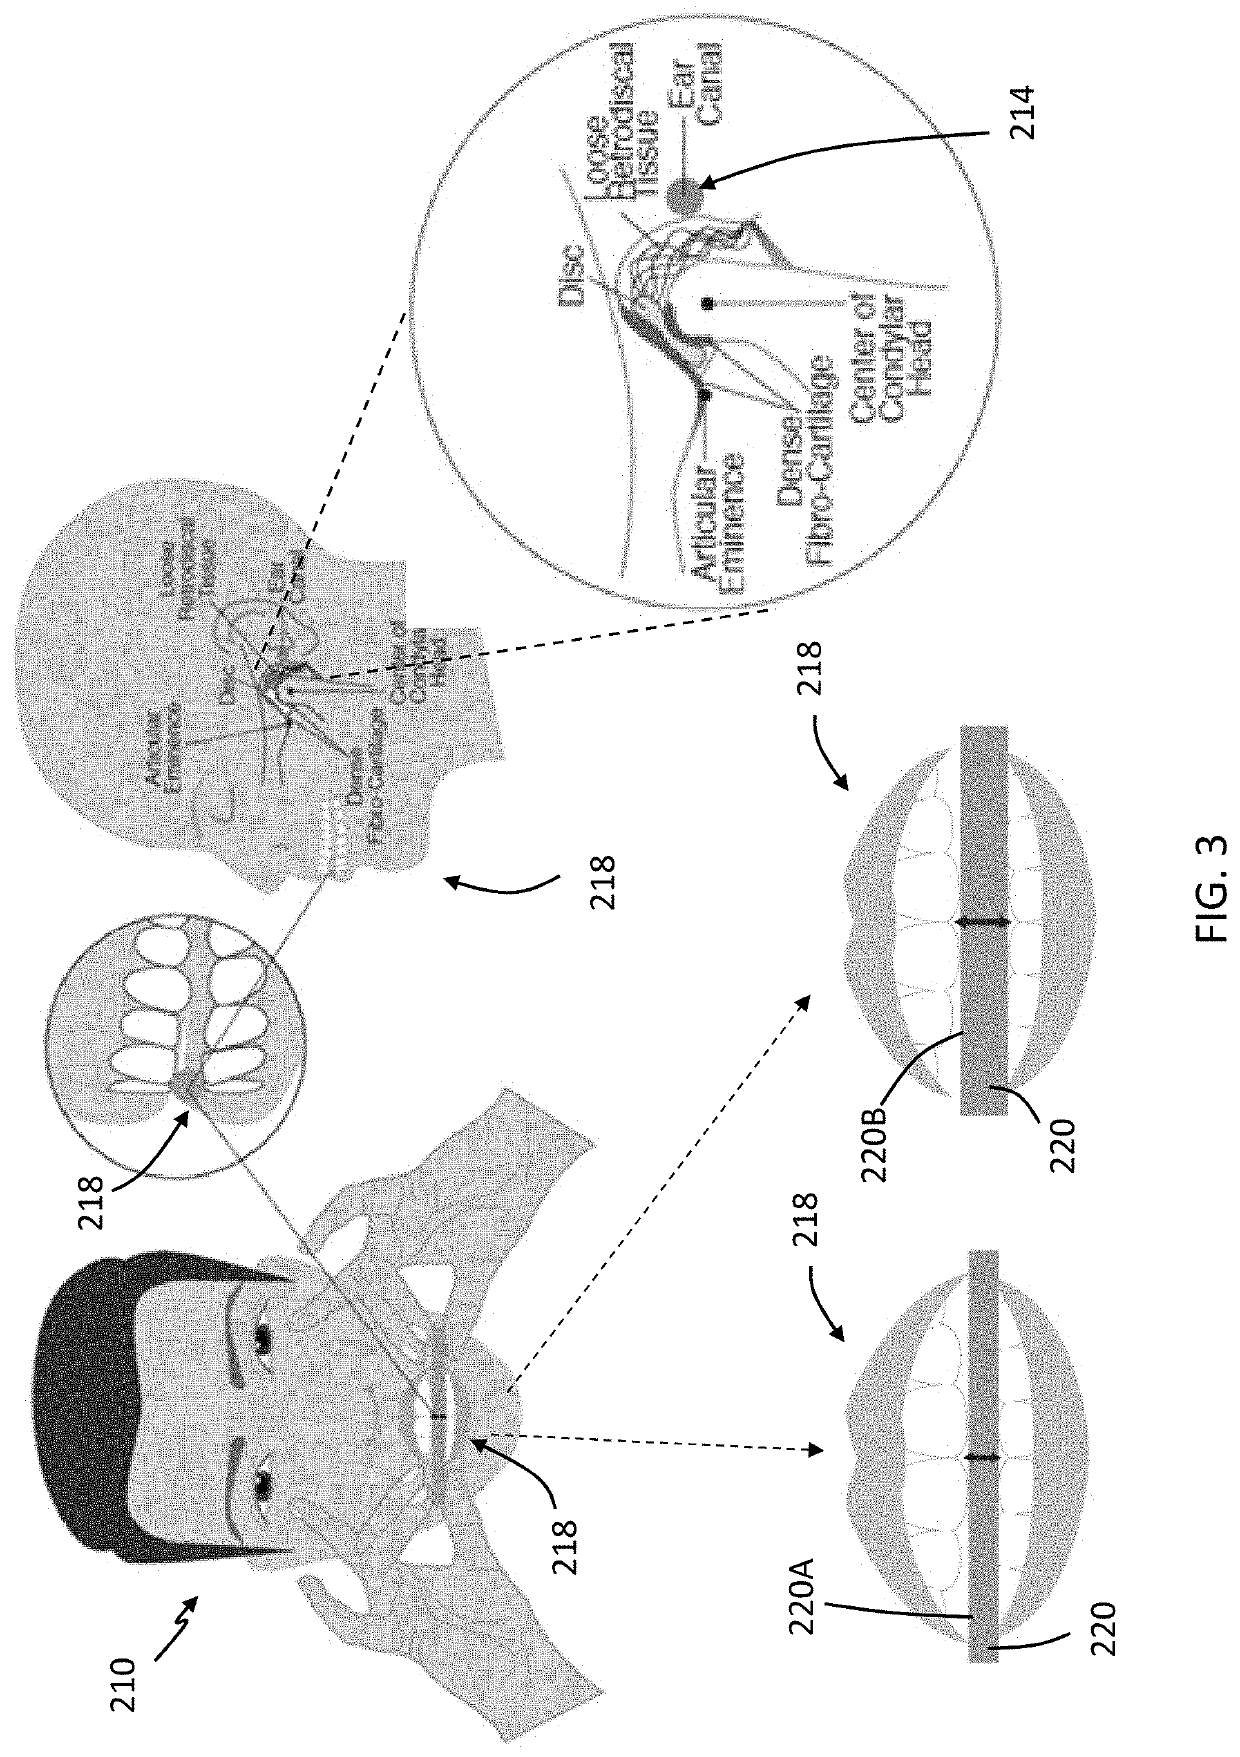 Systems, apparatuses, and methods for diagnosis and treatment of temporomandibular disorders (TMD)